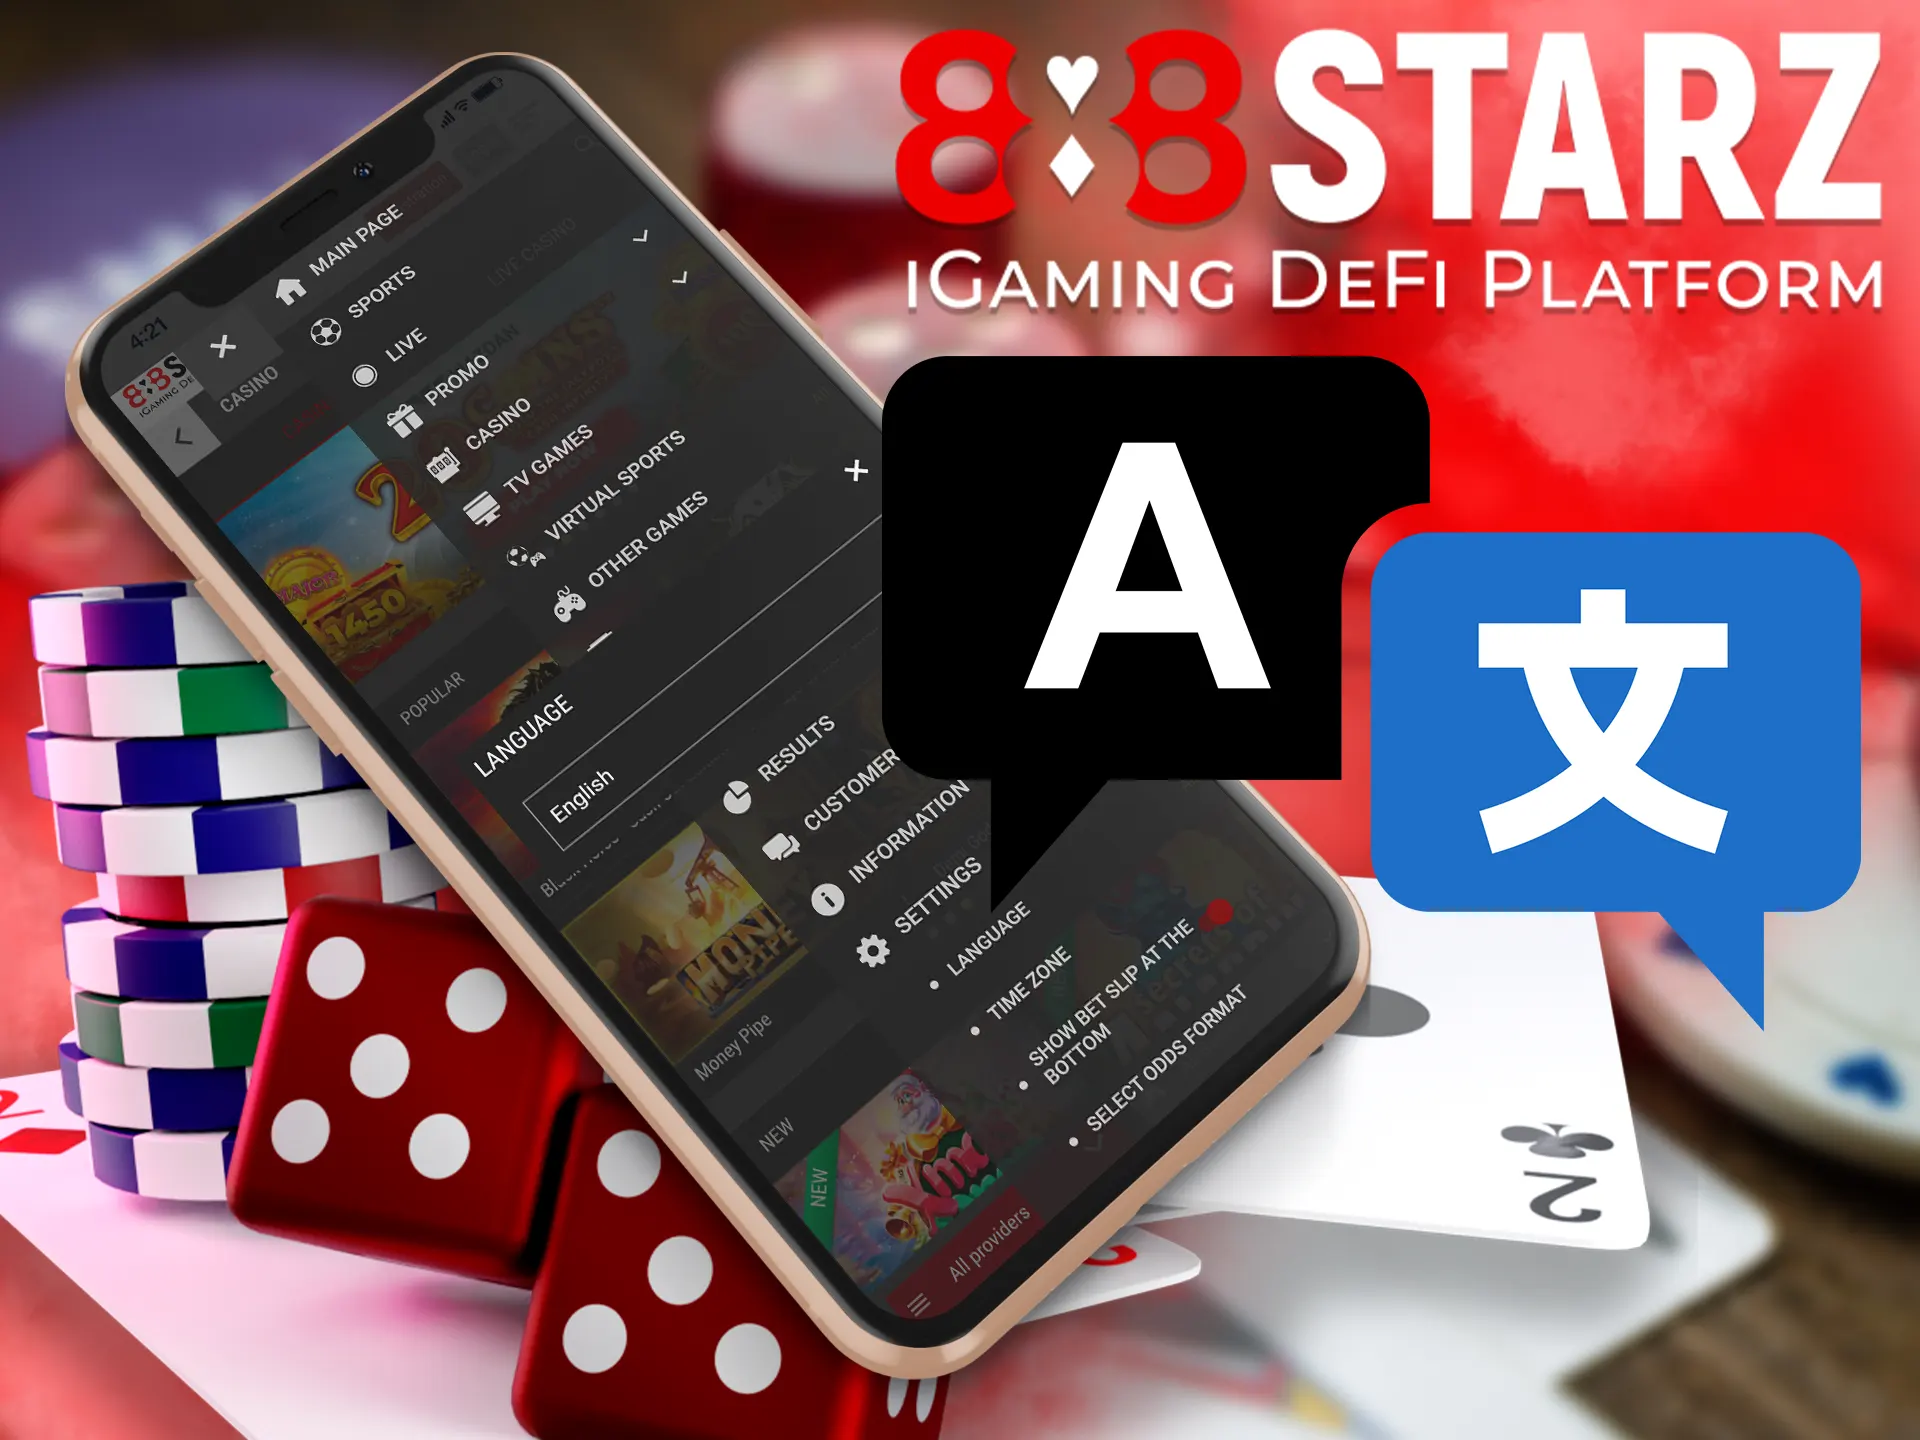 888starz Casino strives to personalize its app as much as possible, so you will be able to play in your native language Bengali and English.